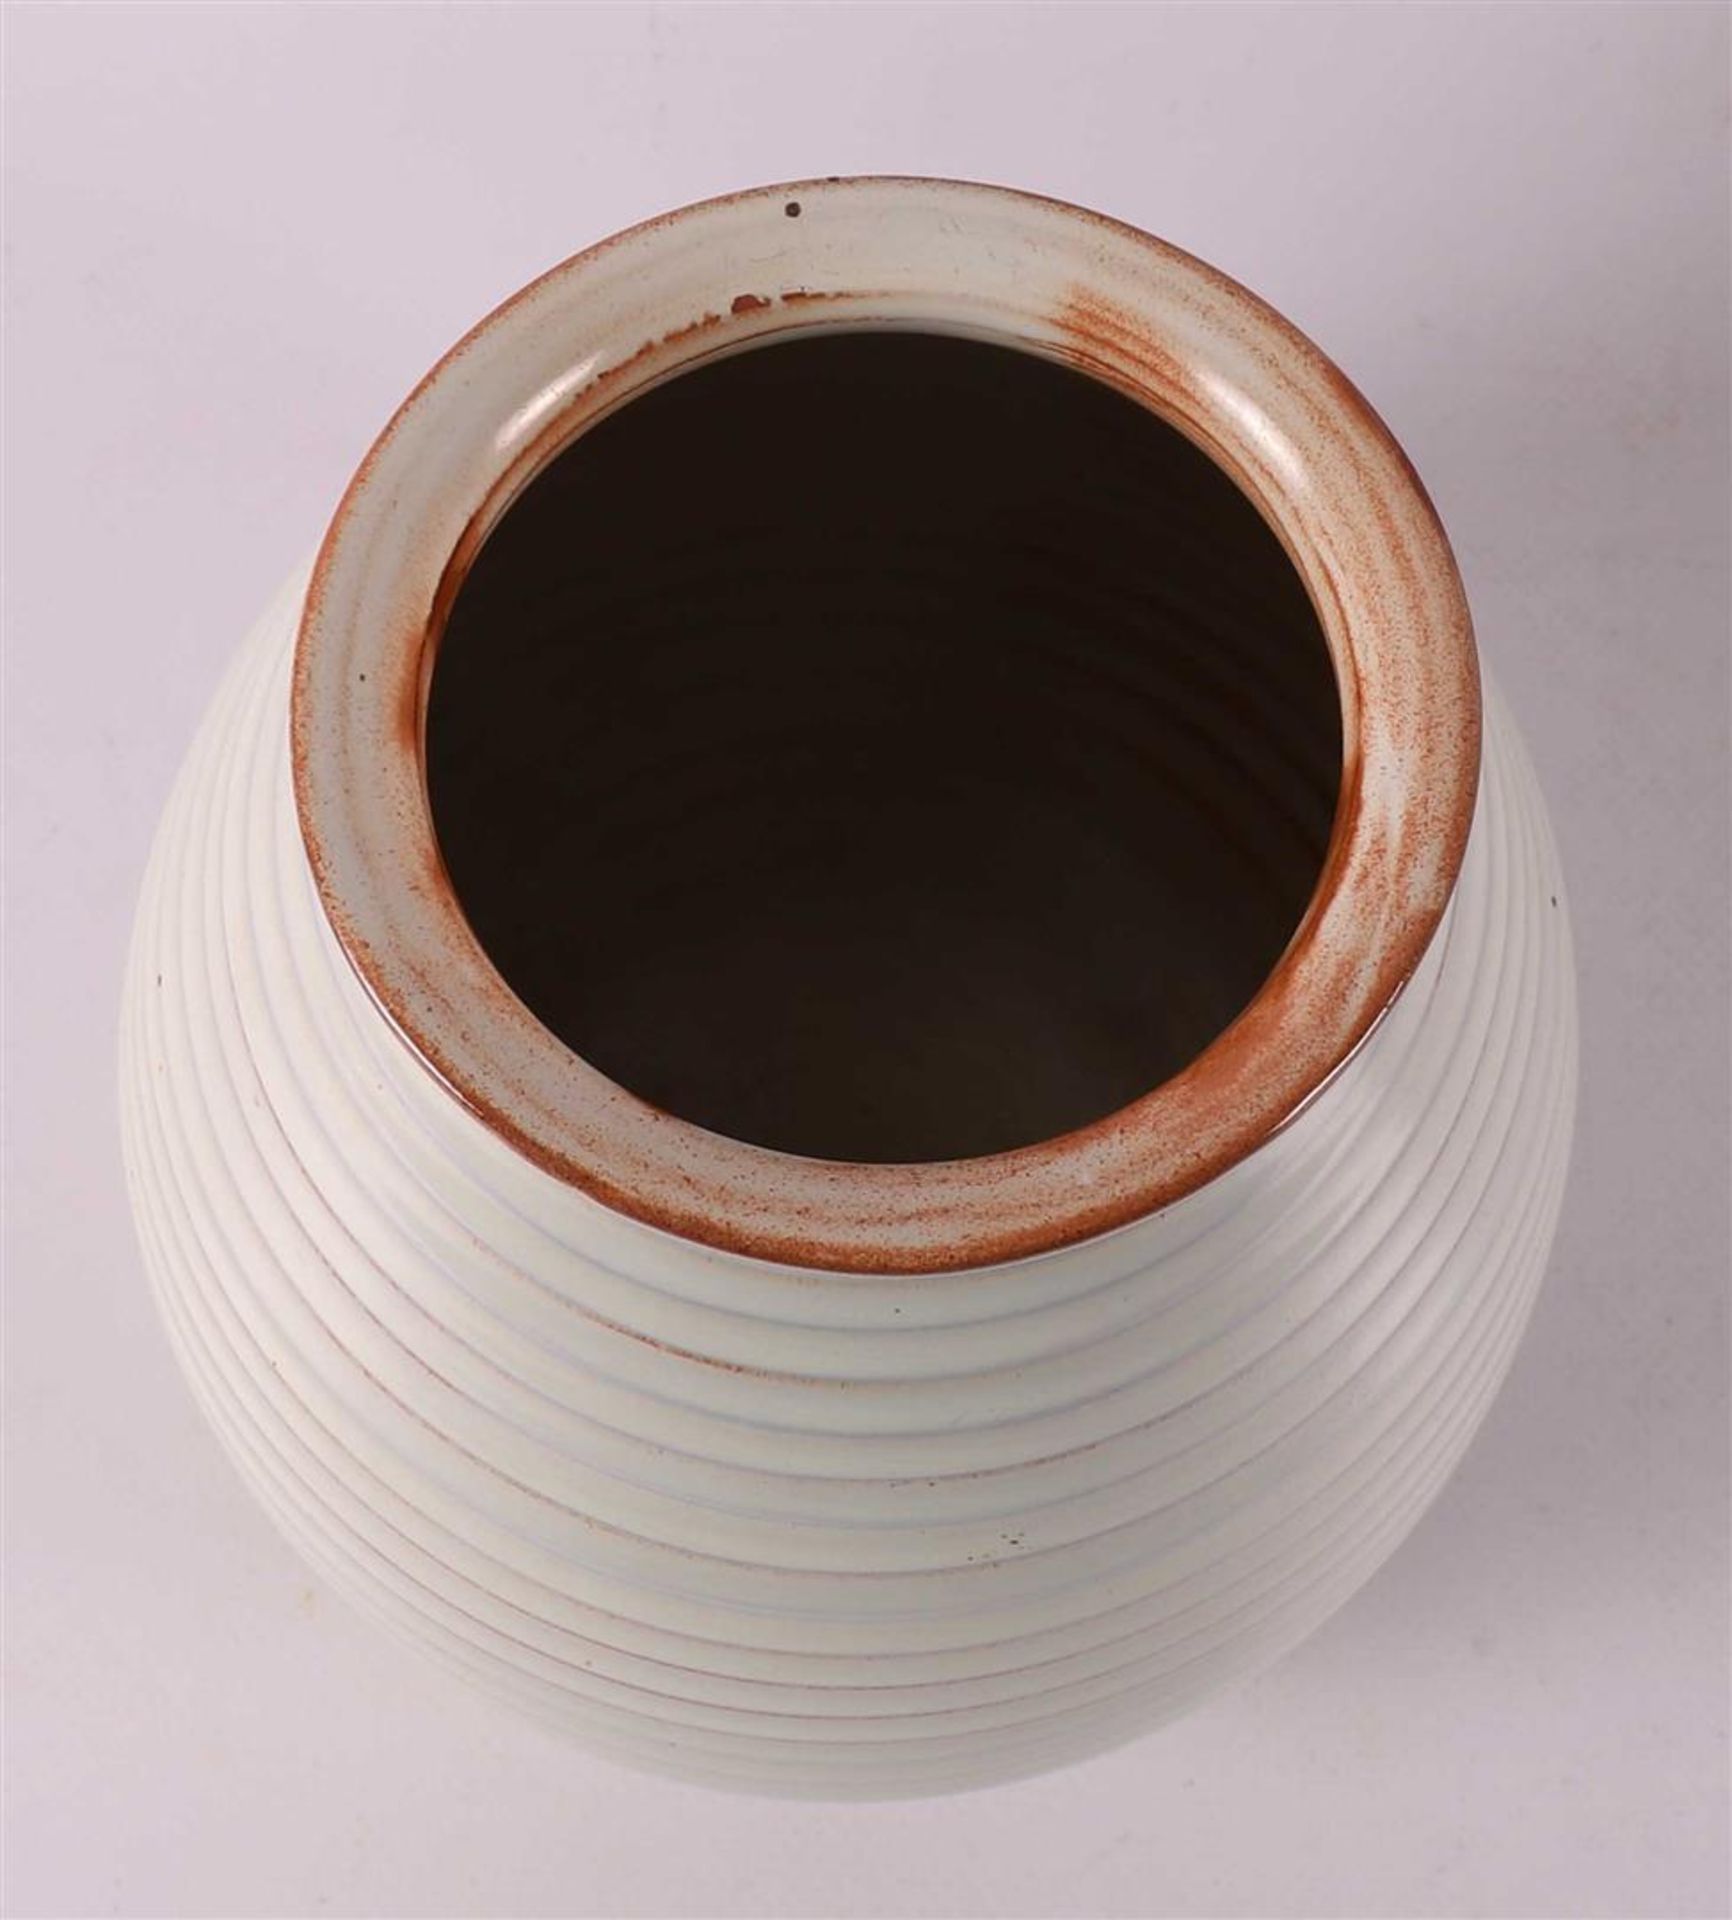 ADCO. A gray earthenware spherical vase, mid 20th century - Image 6 of 10